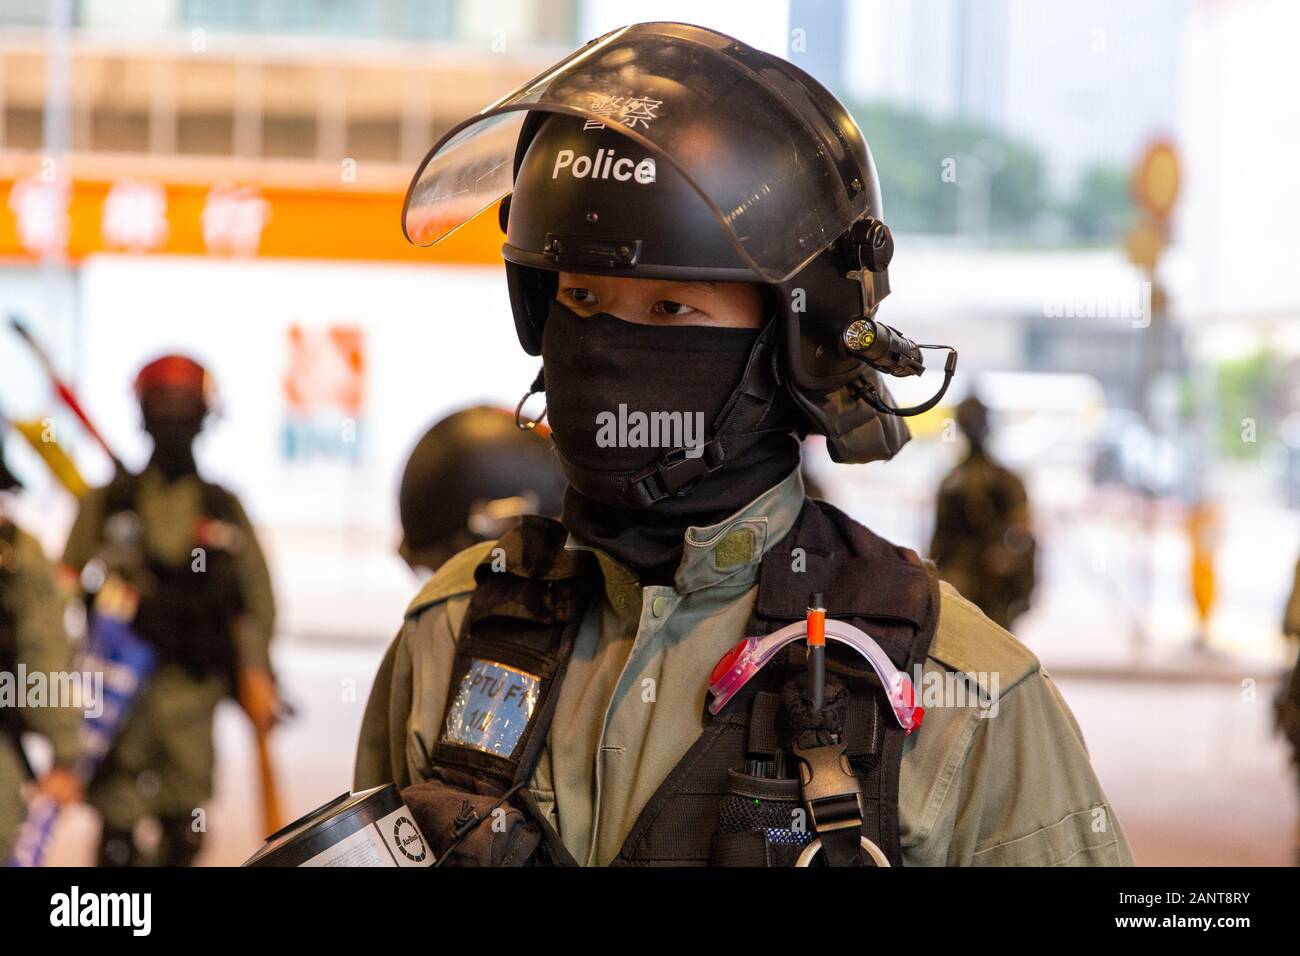 Hong Kong, China. 19th Jan, 2020. Police officer at the Hong Kong Protest - Universal Seige on Communists Rally at Chater Garden, Central, Hong Kong. Credit: David Ogg/Alamy Live News Stock Photo